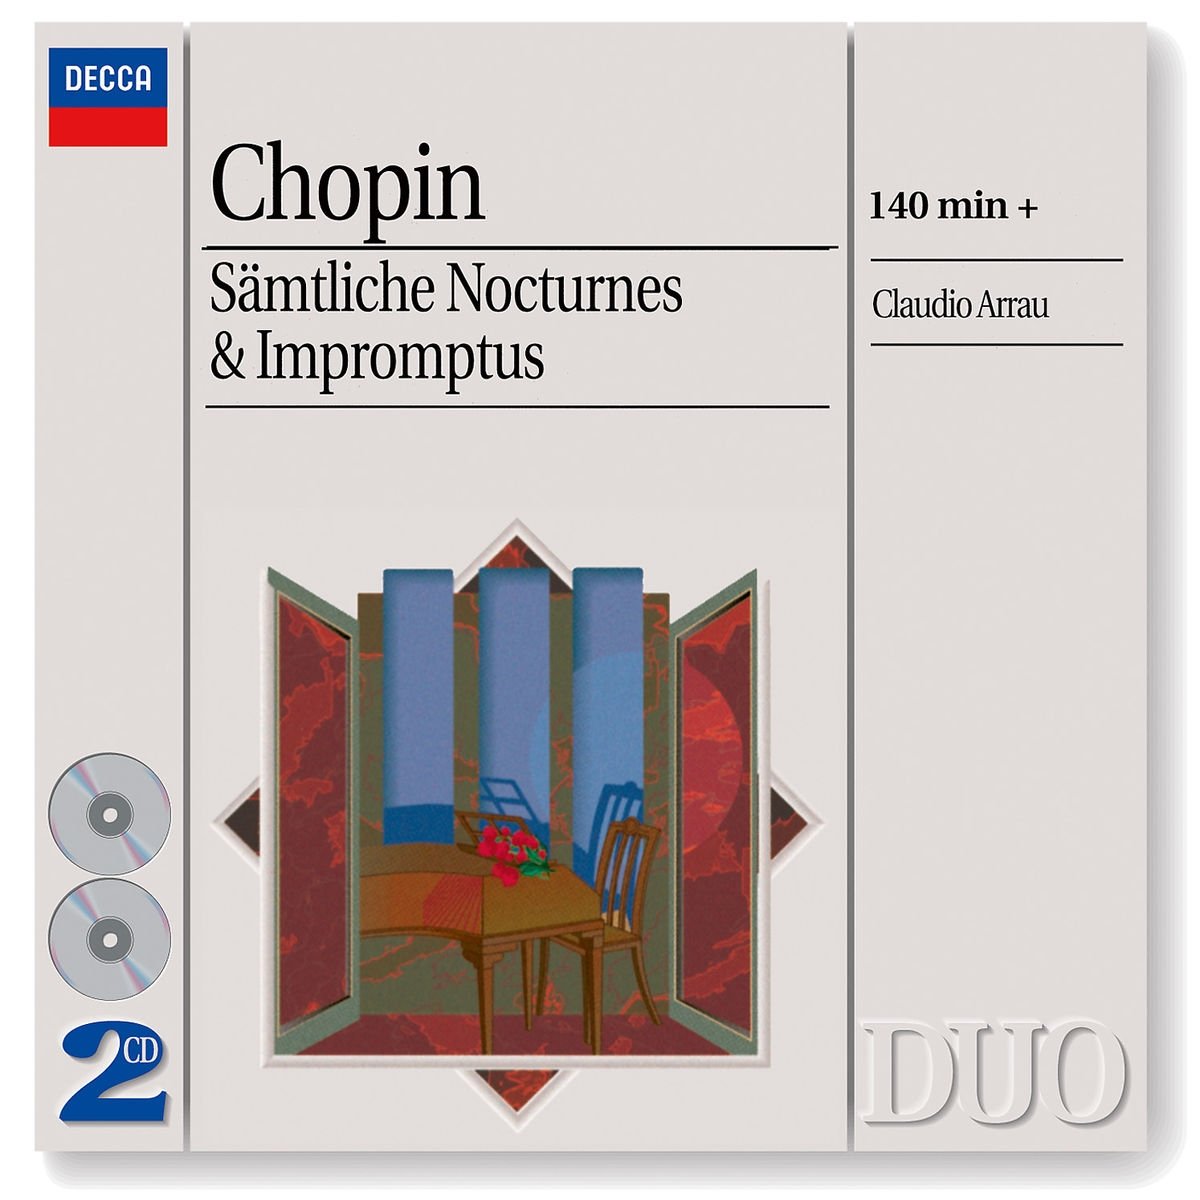 Chopin: Complete Nocturnes & Impromptus on MovieShack